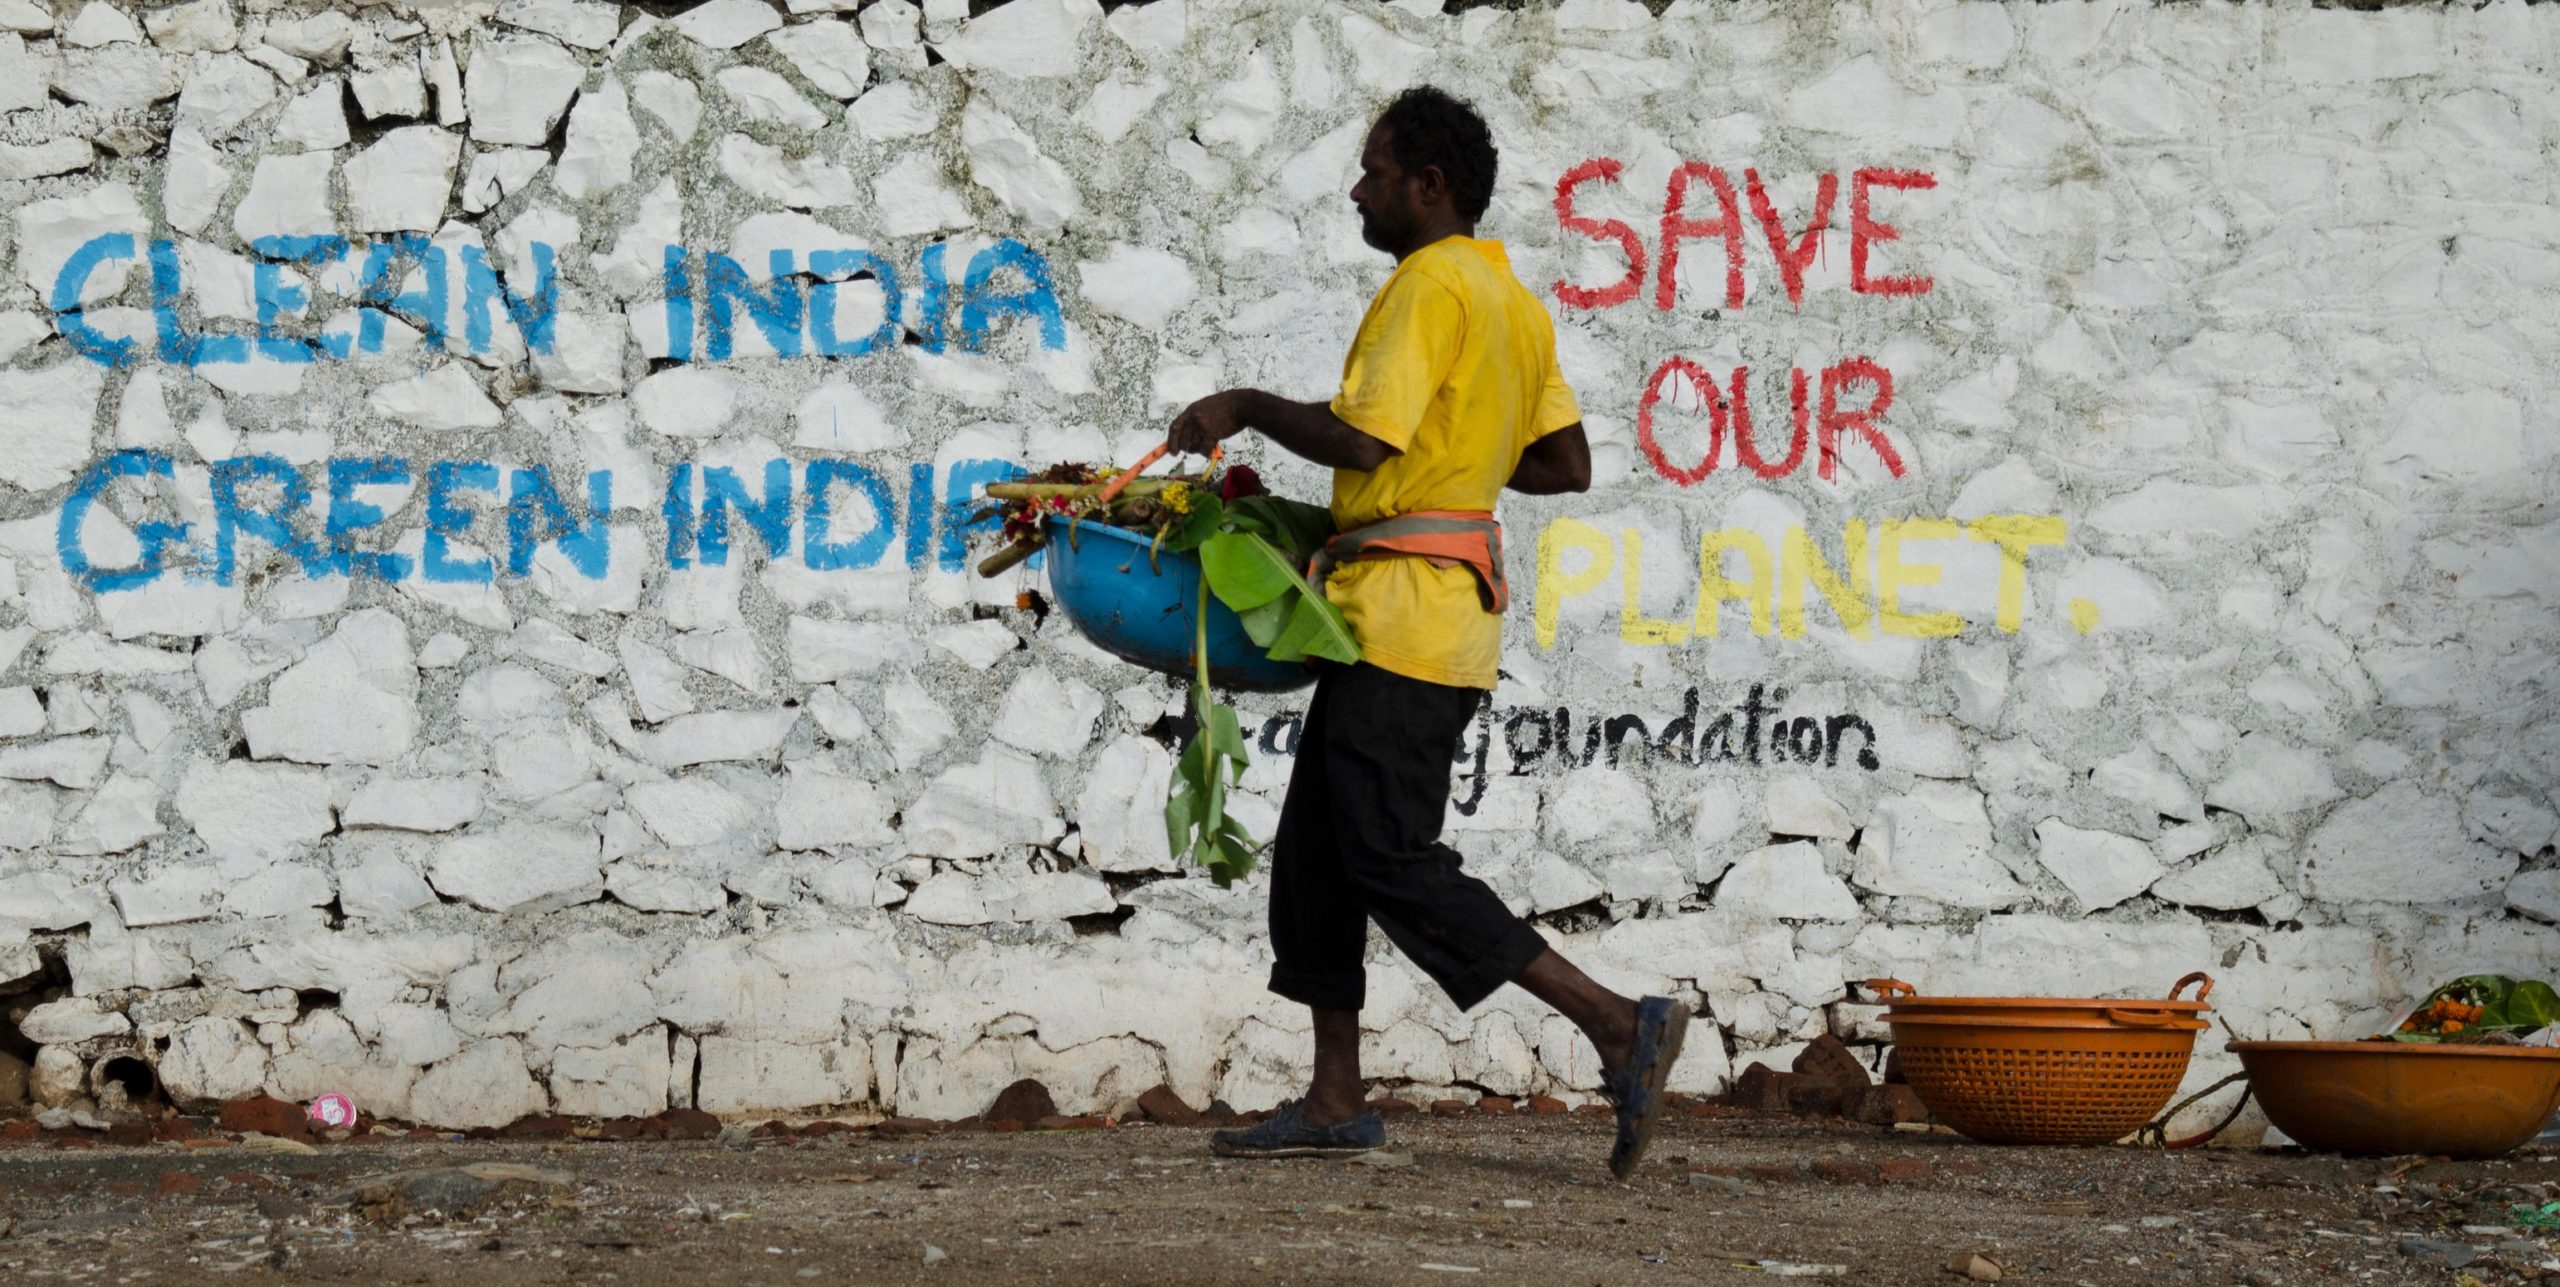 Man cleaning beach in India. Wall with background text 'Clean India, Green India' and 'Save our Planet'